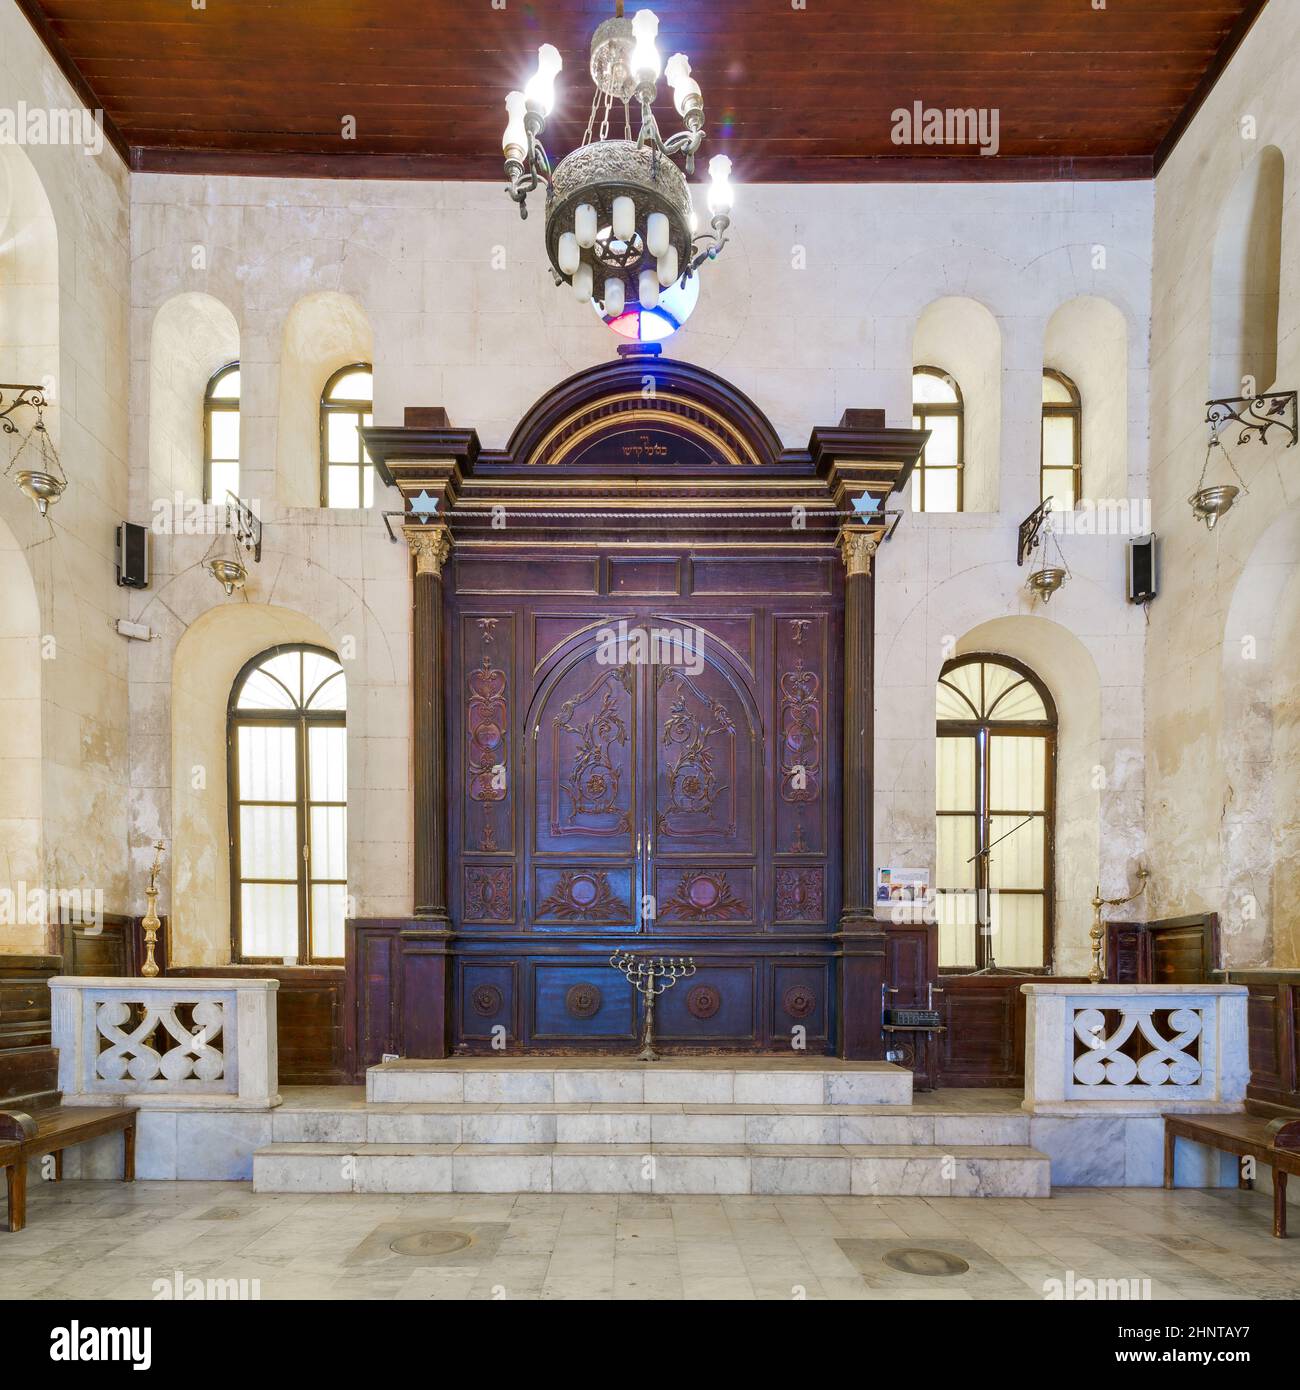 Wooden decorated entrance of historic Jewish Maimonides Synagogue with arched windows and chandelier, Cairo Egypt Stock Photo